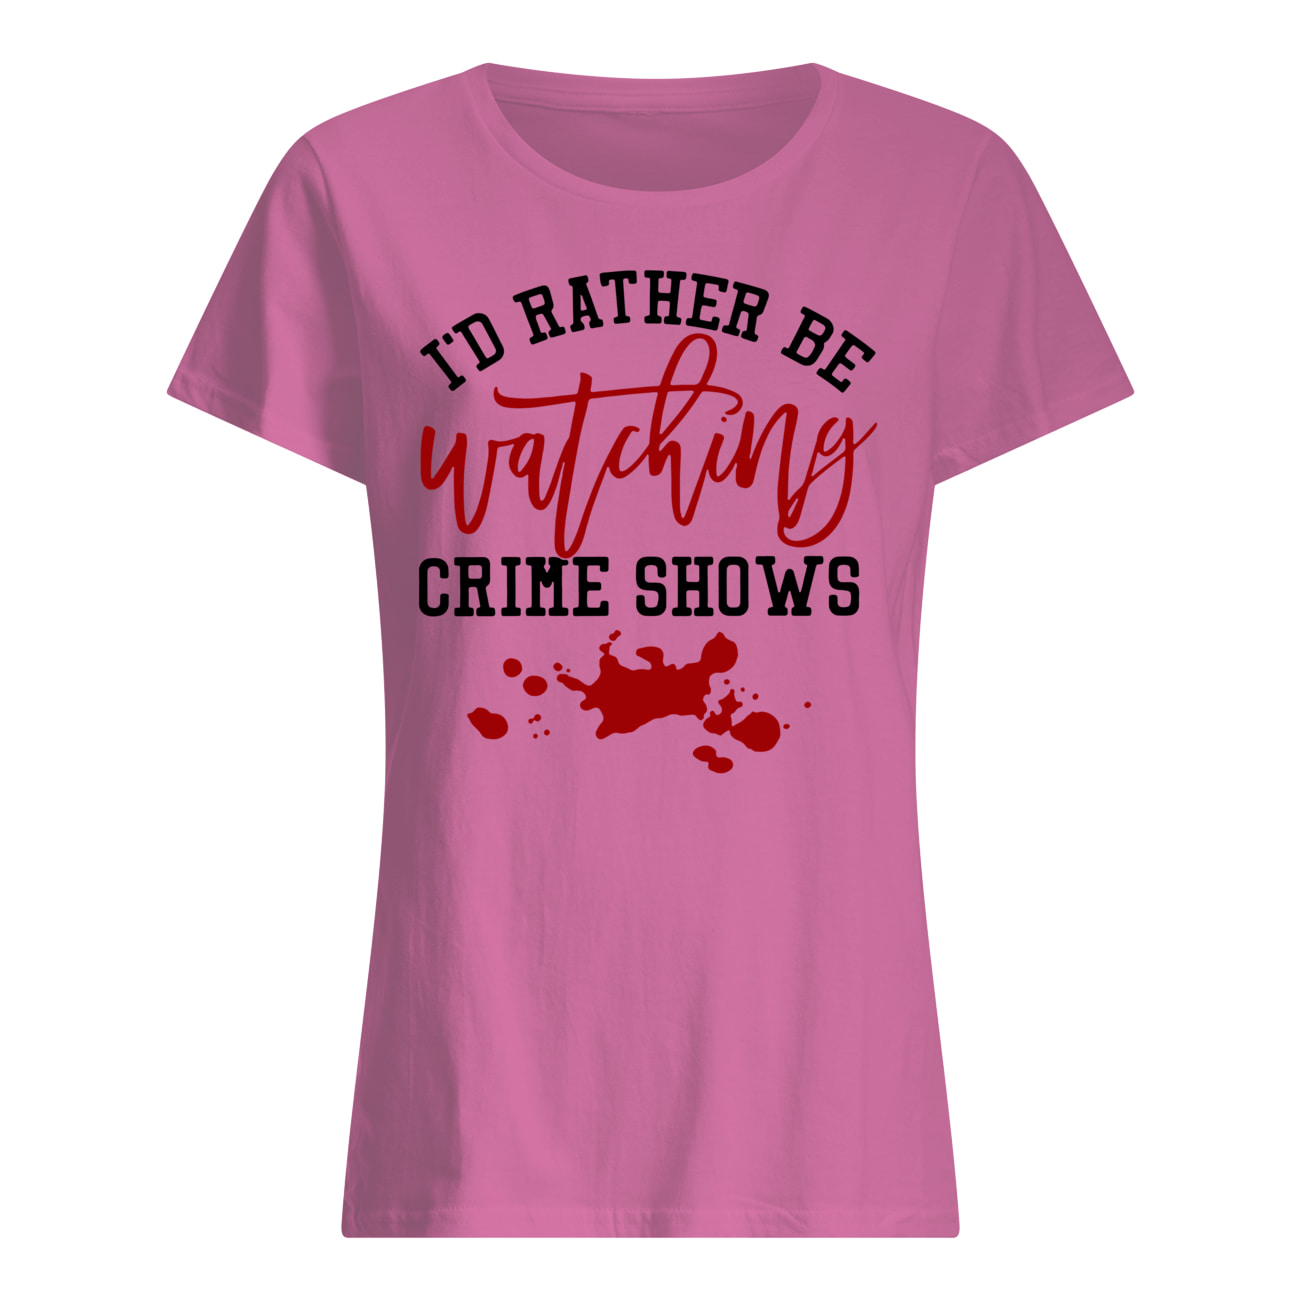 I'd rather be watching crime shows womens shirt